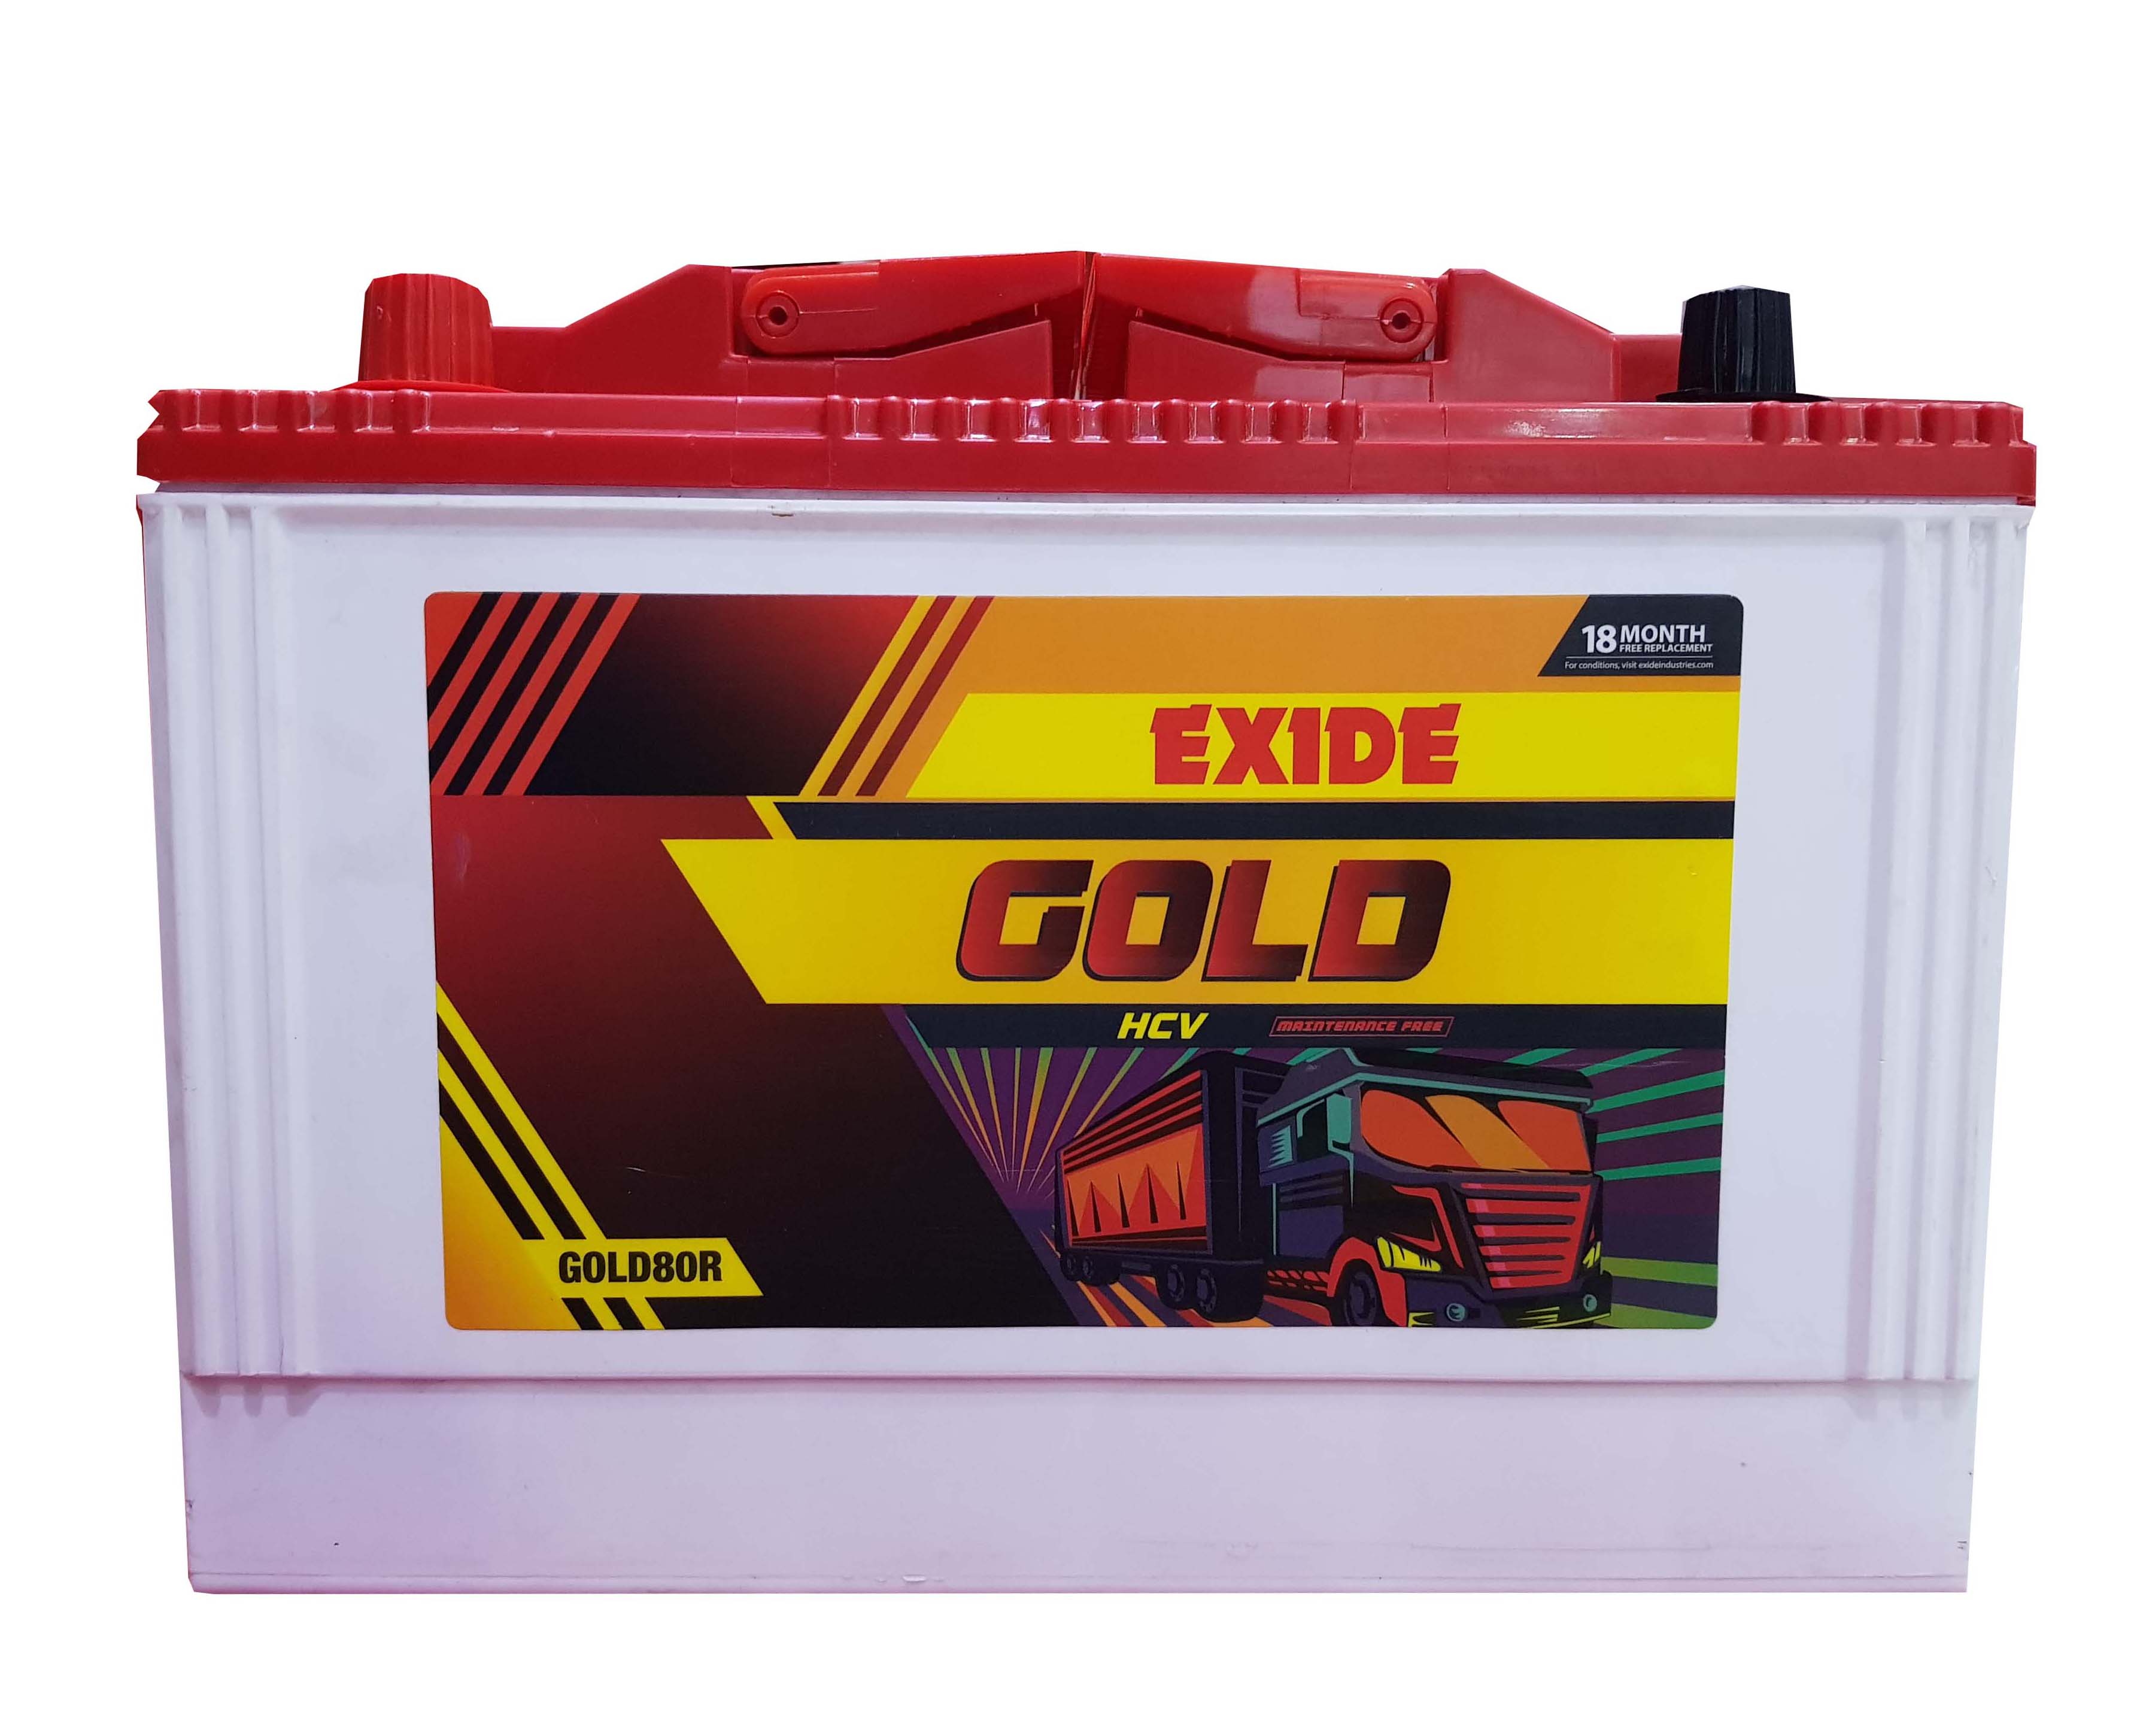  Exide Gold battery for tractor 80ah 